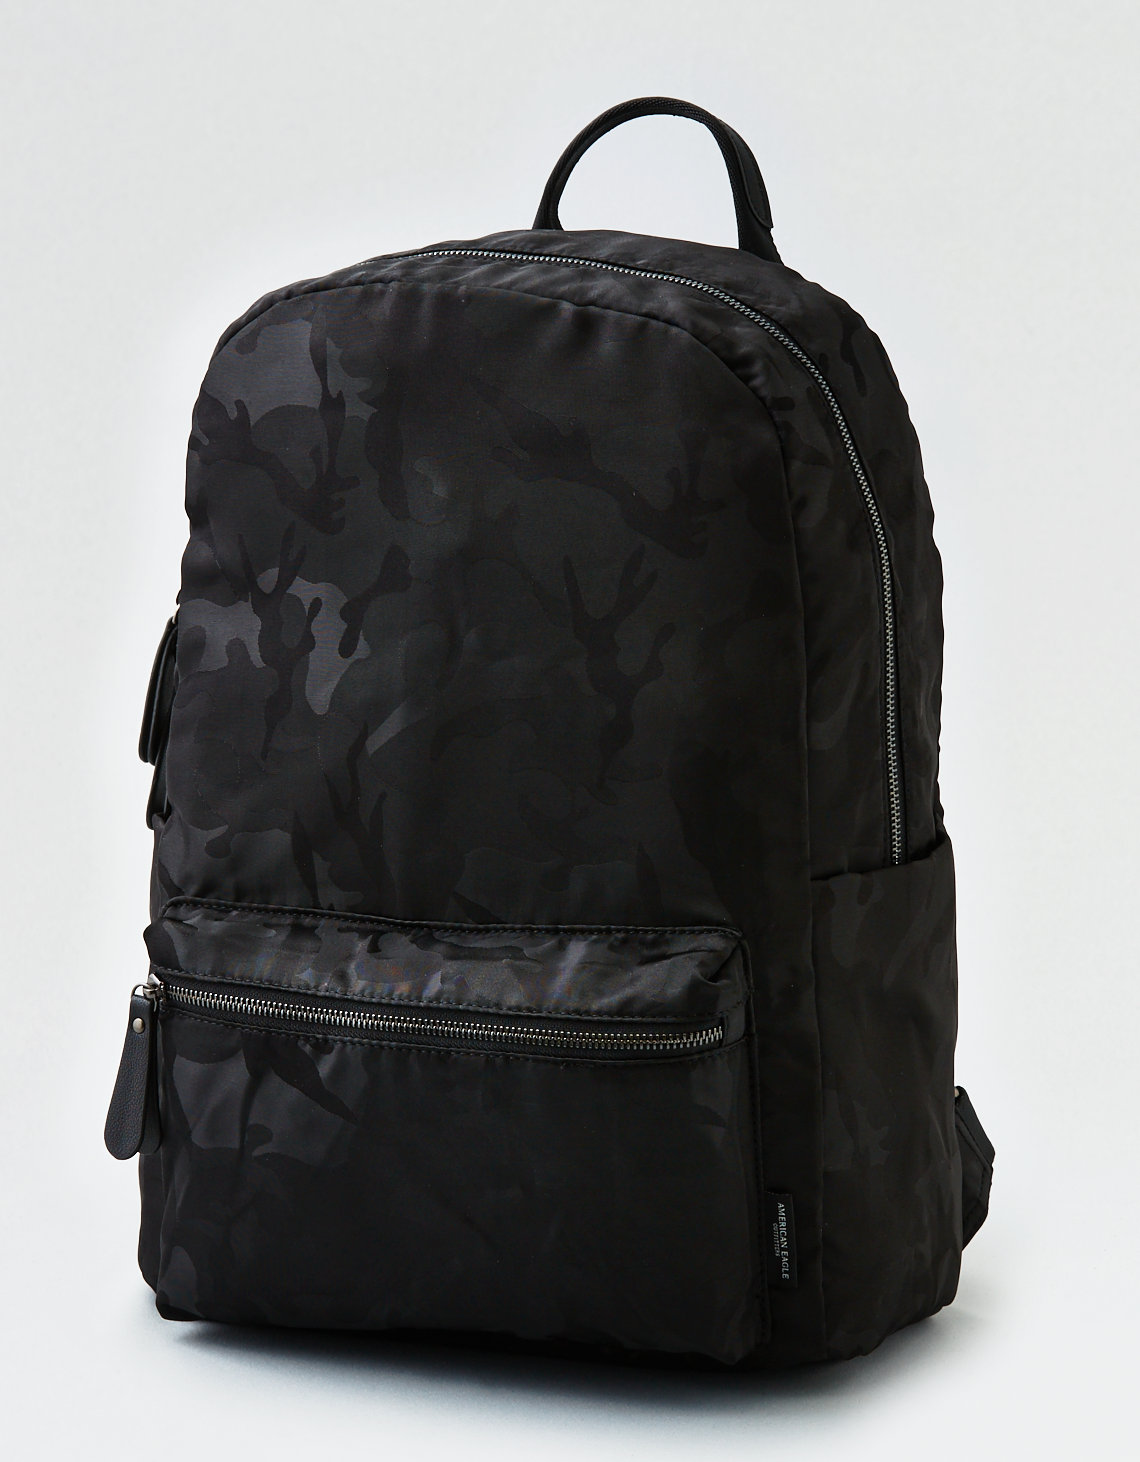 American Eagle 0 Mens and Womens Backpacks/Bags Clearance $4.99 plus shipping ...